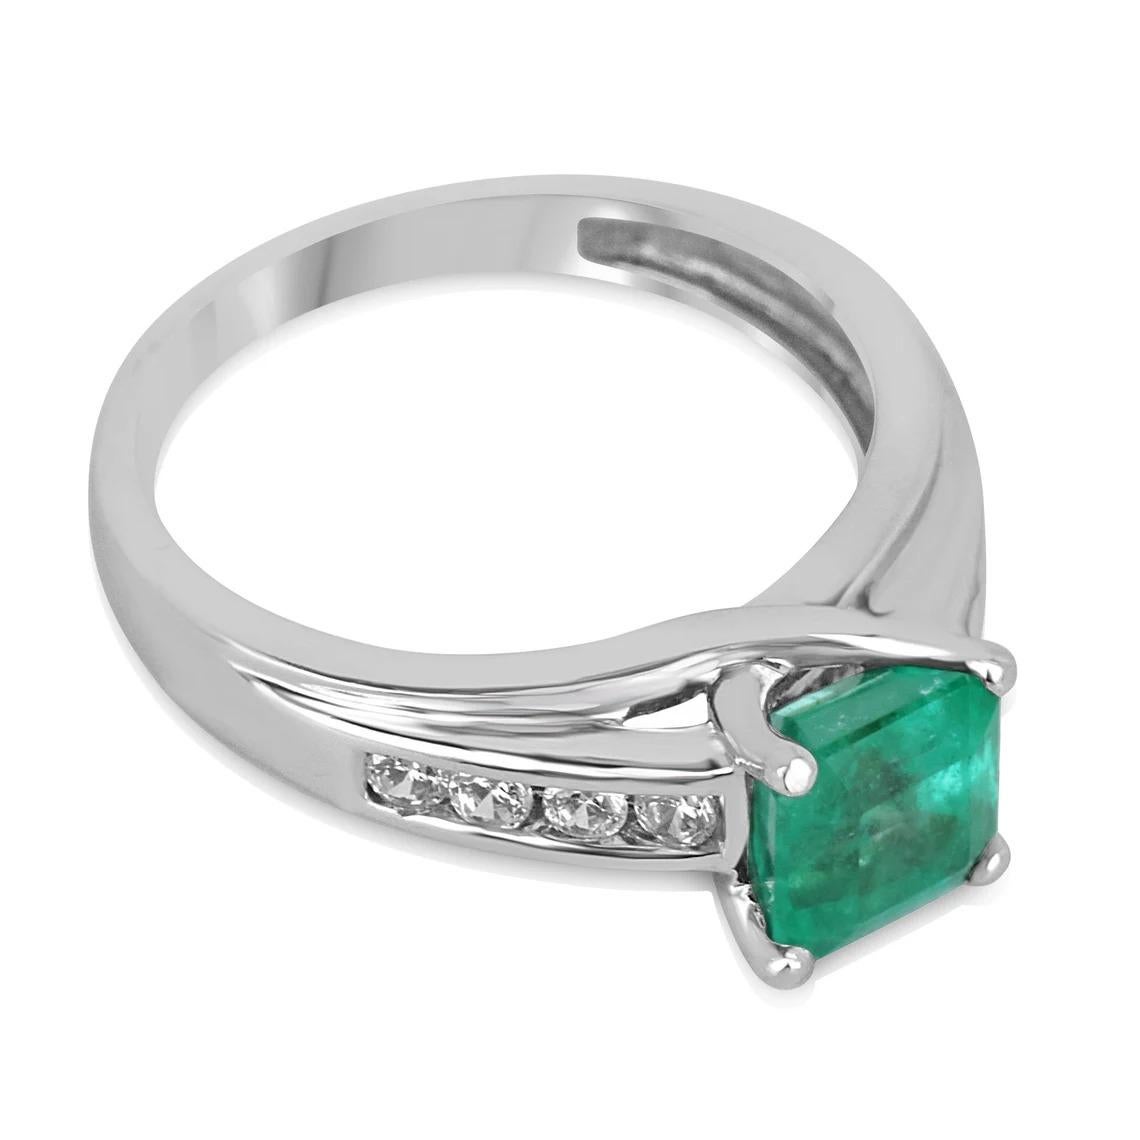 This stunning ring features a 1.74 total carat weight earth-mined emerald as the centerpiece, which is set in 14K white gold. The emerald's bright green color is complemented by the sparkling diamond accents that highlight the shank, adding a touch